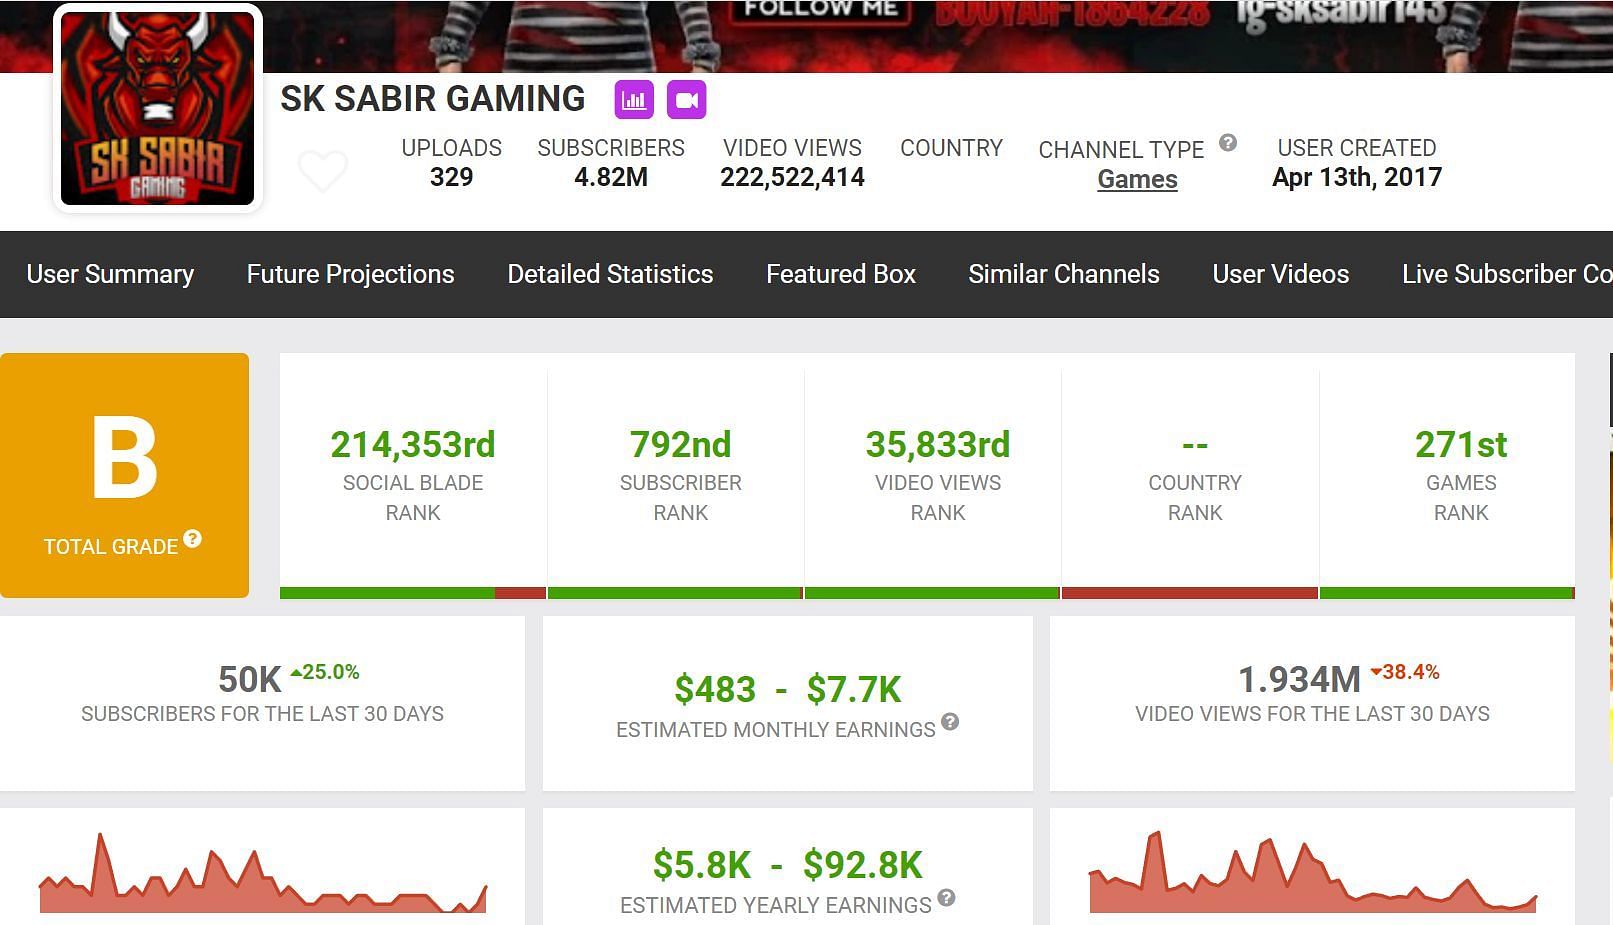 These are the estimated earnings (Image via Social Blade)